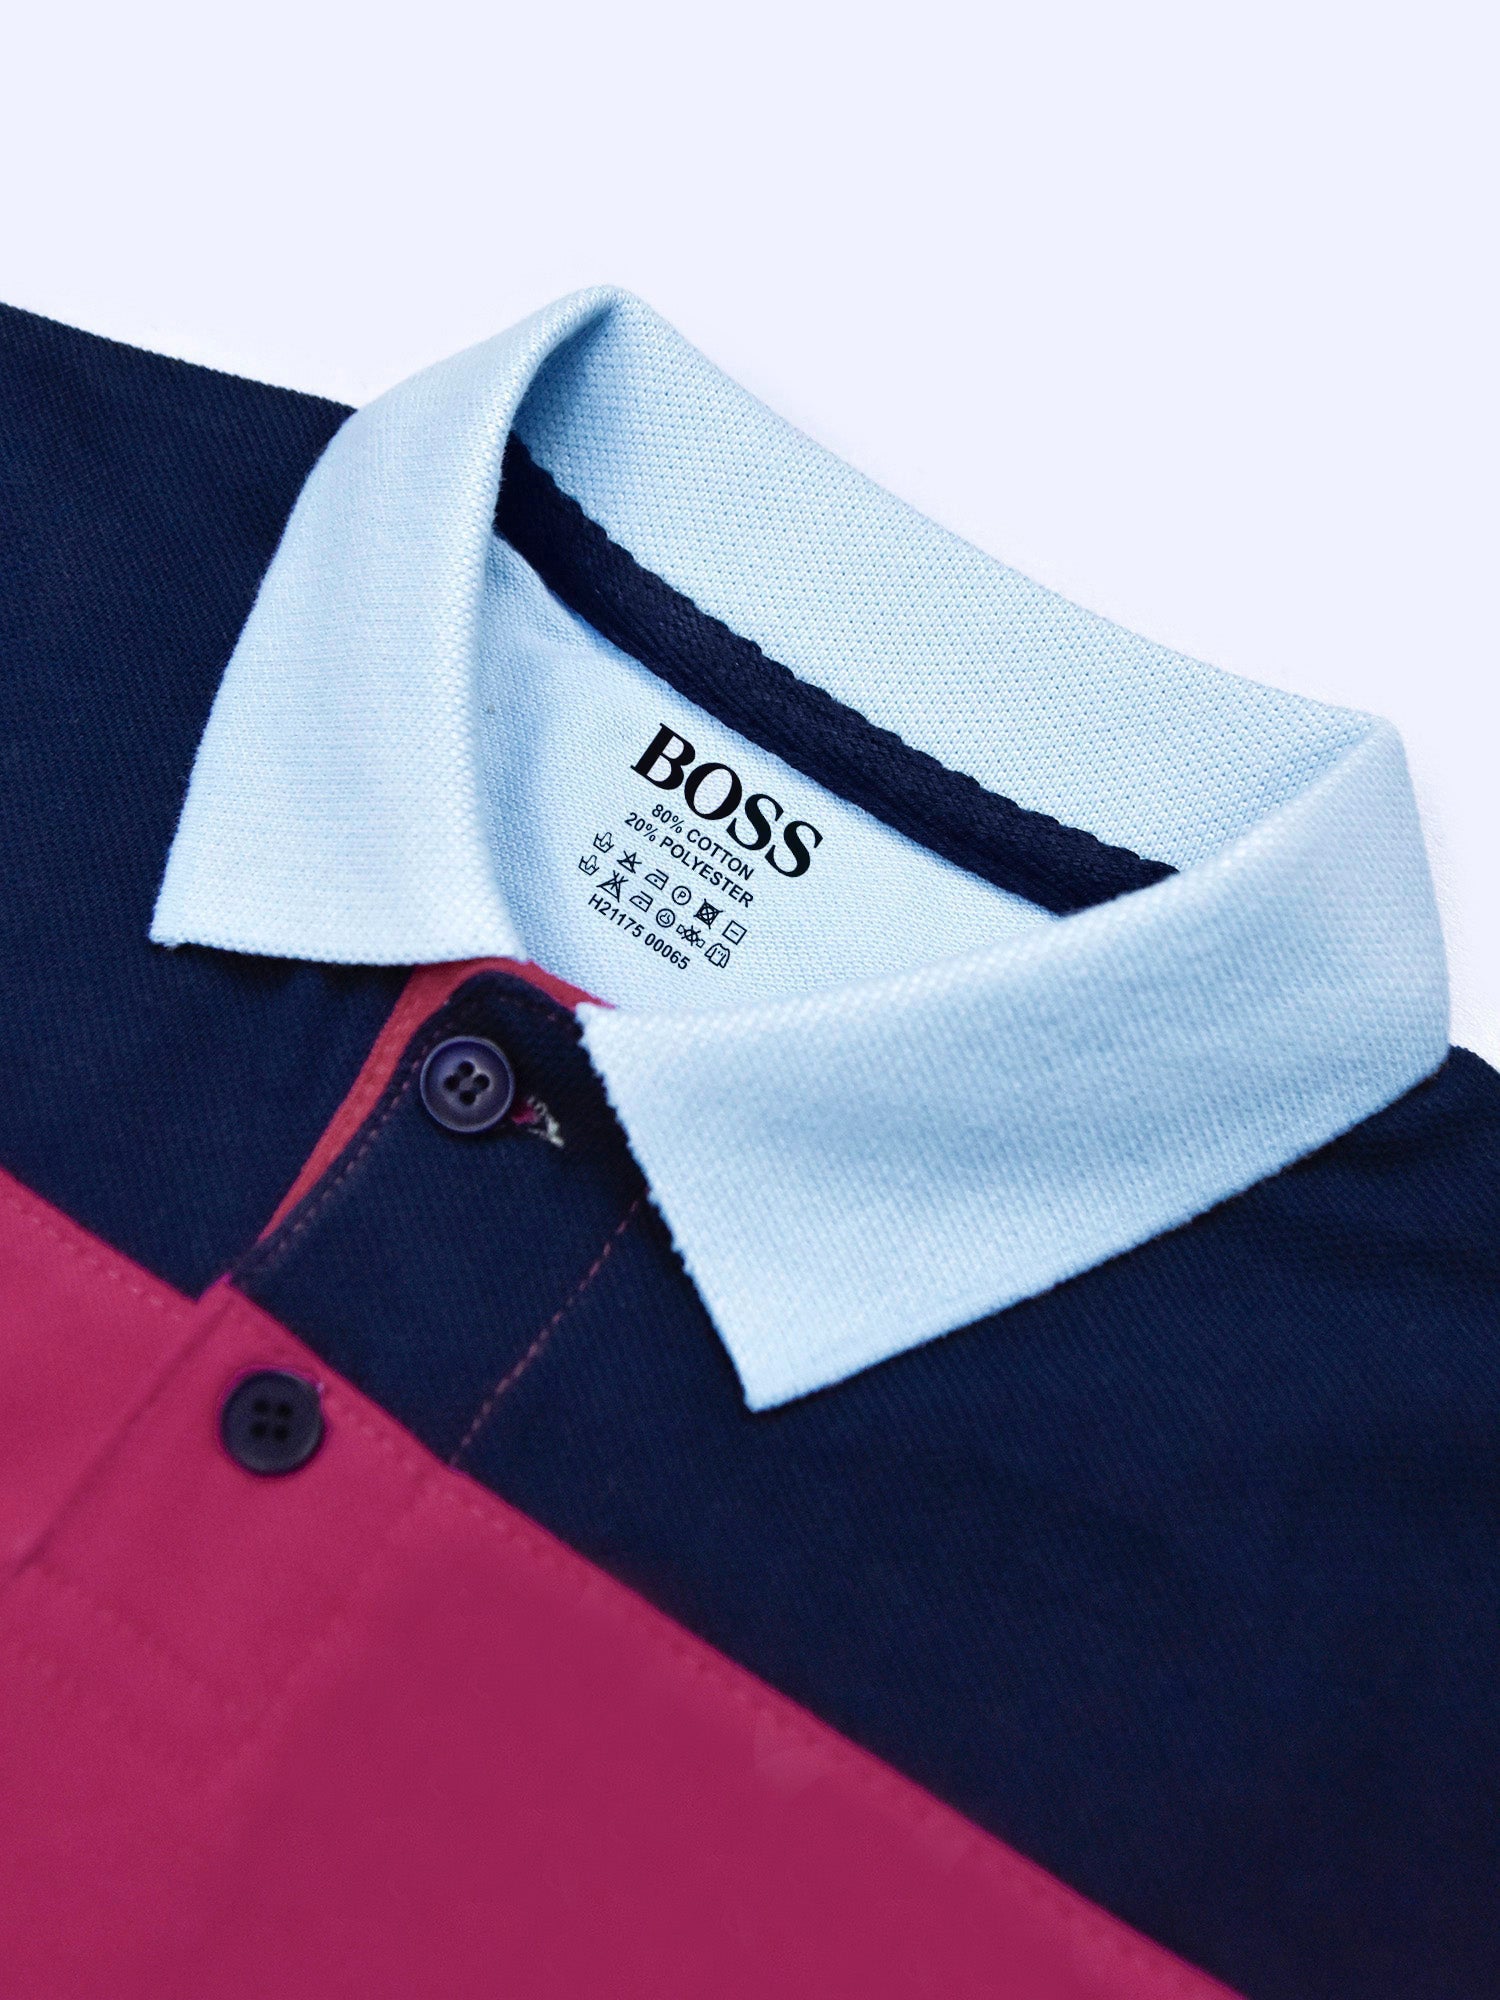 NXT Summer P.Q Polo Shirt For Kids-Sky with Dark Pink & Navy-BE937/BR13184